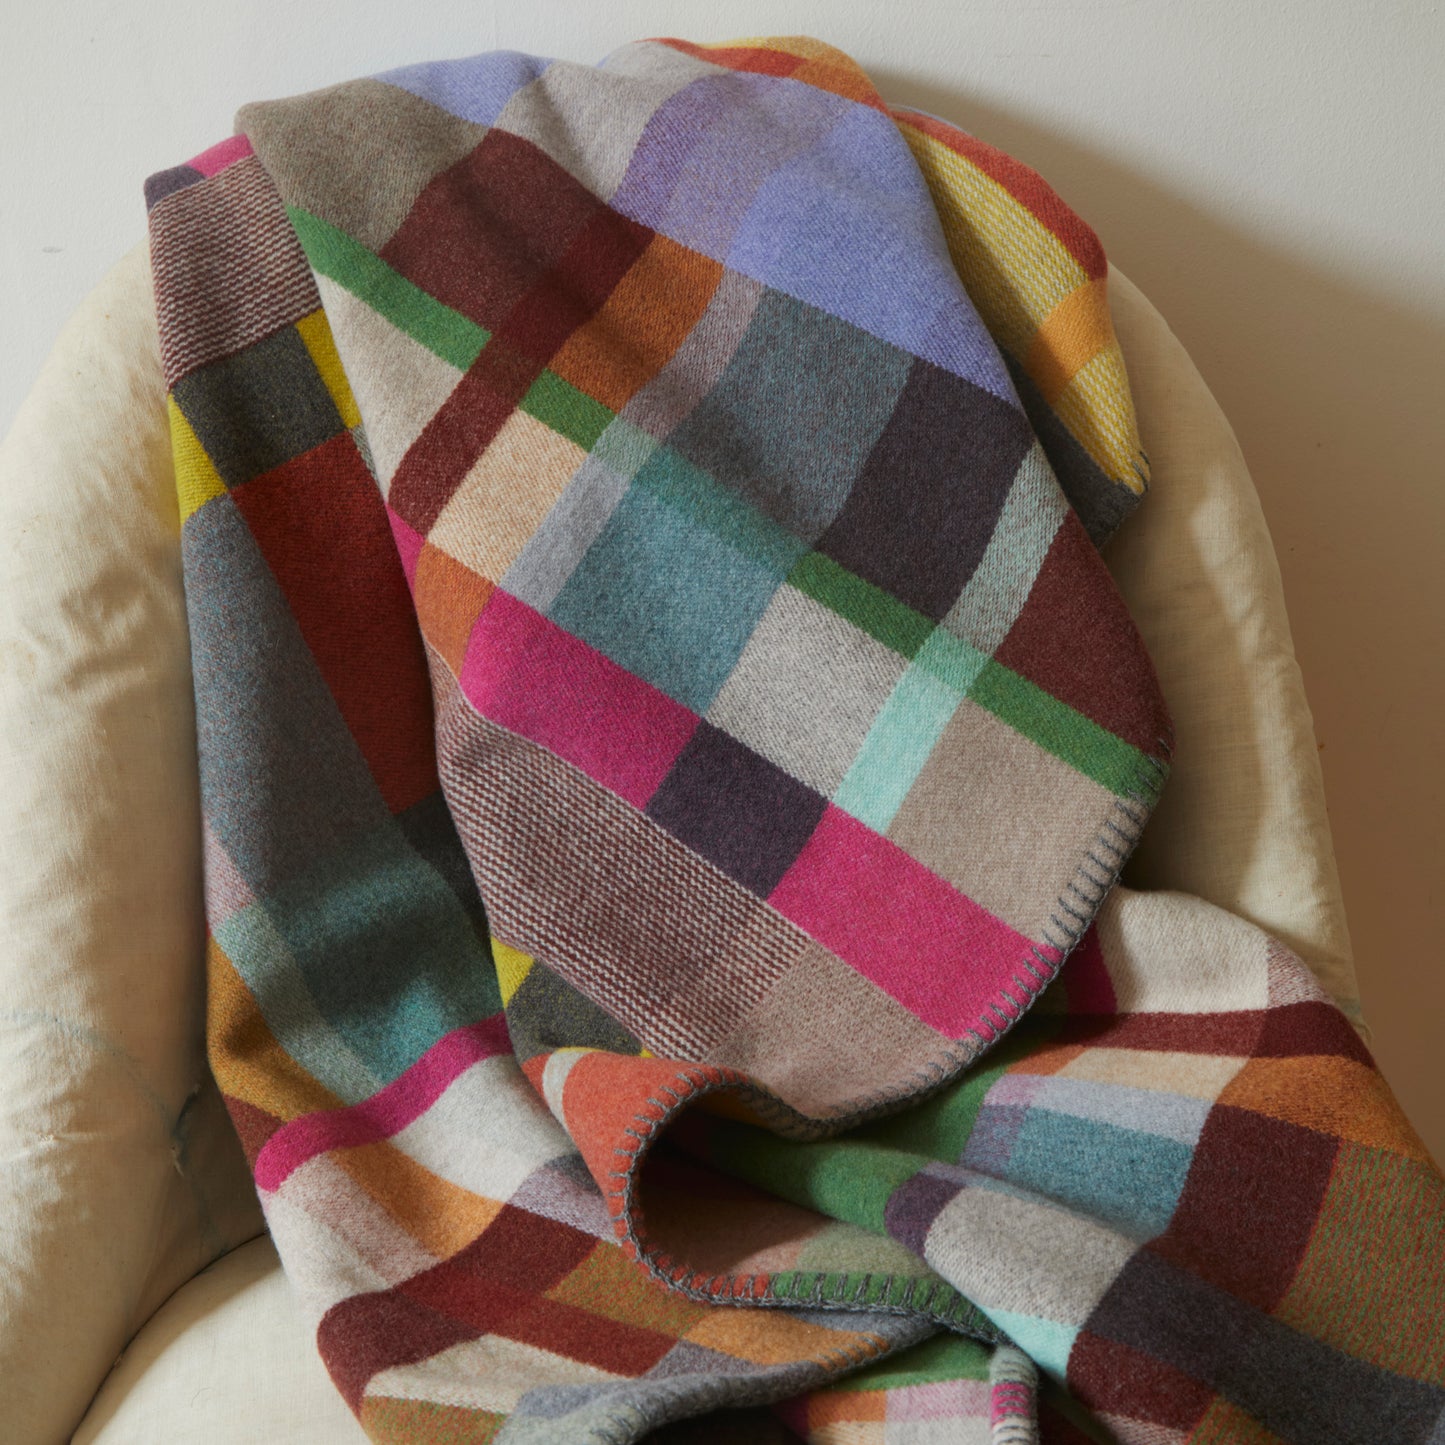 The Selvedge Blanket by Wallace & Sewell